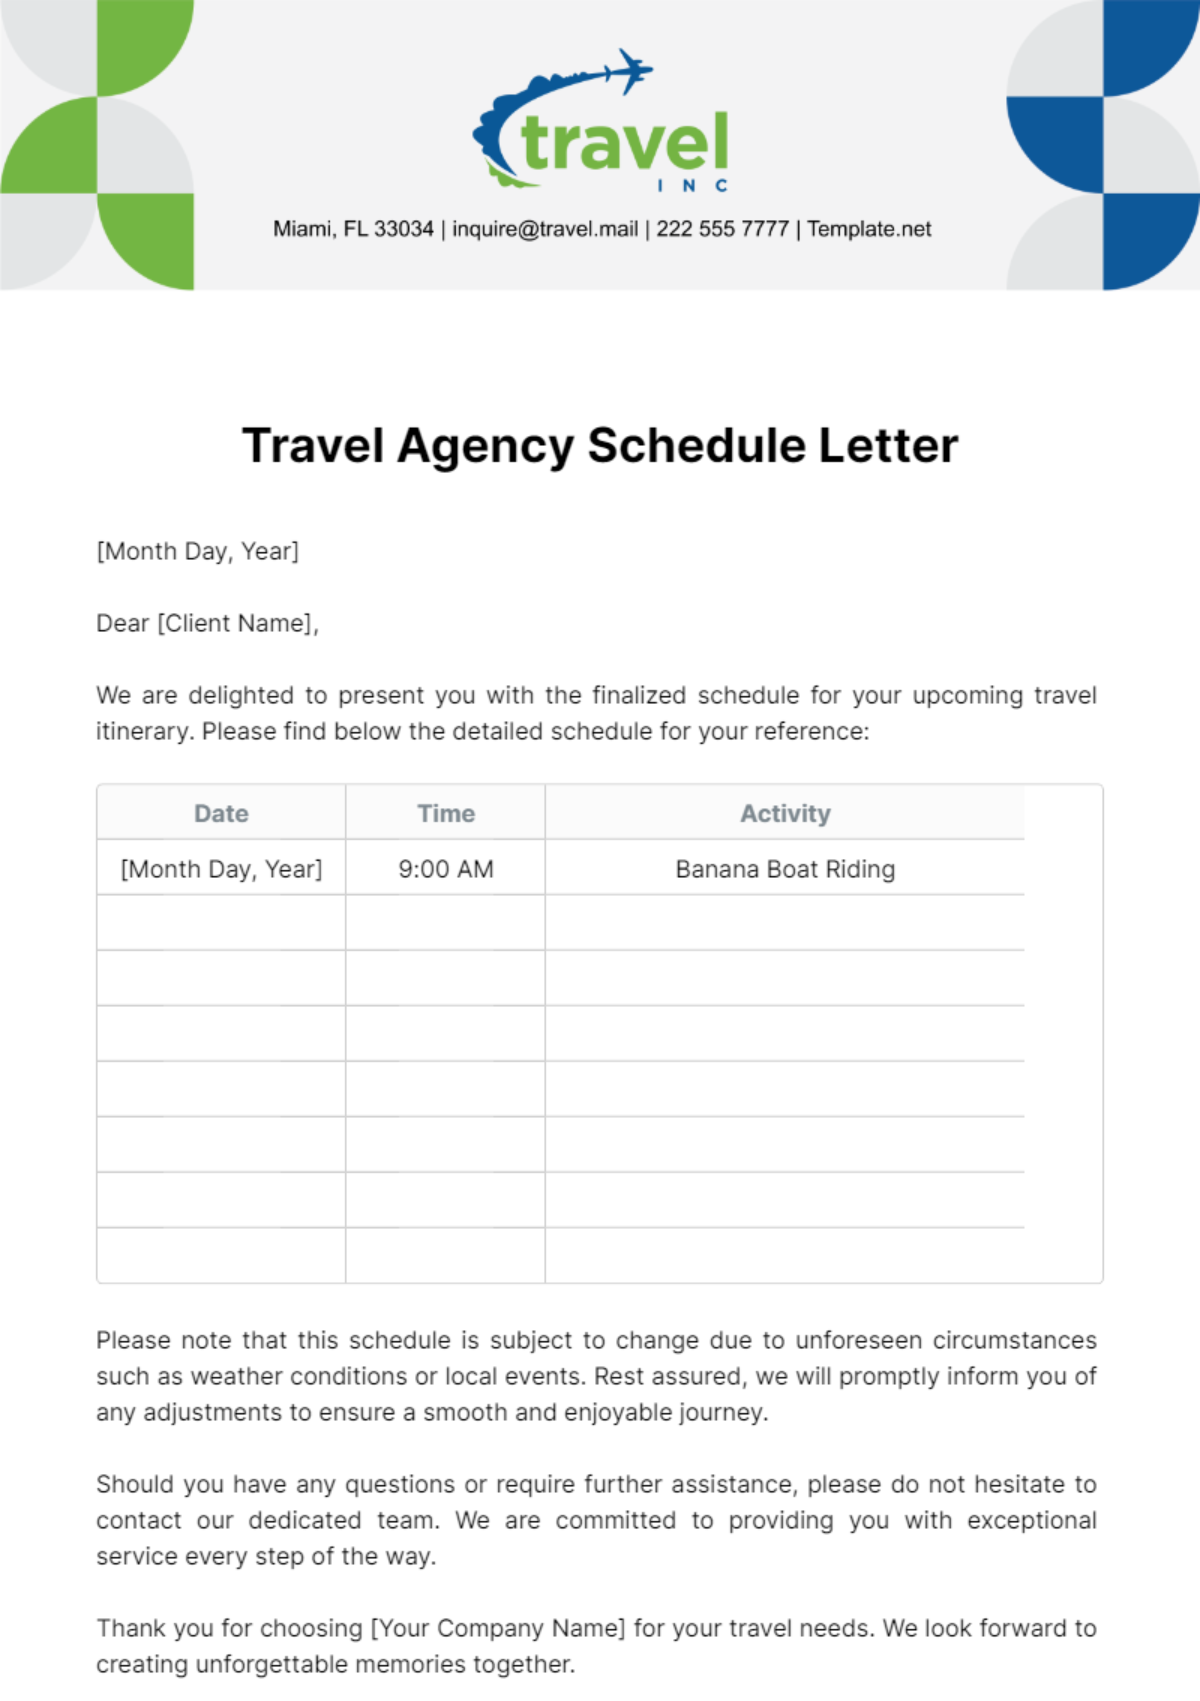 Travel Agency Schedule Letter Template